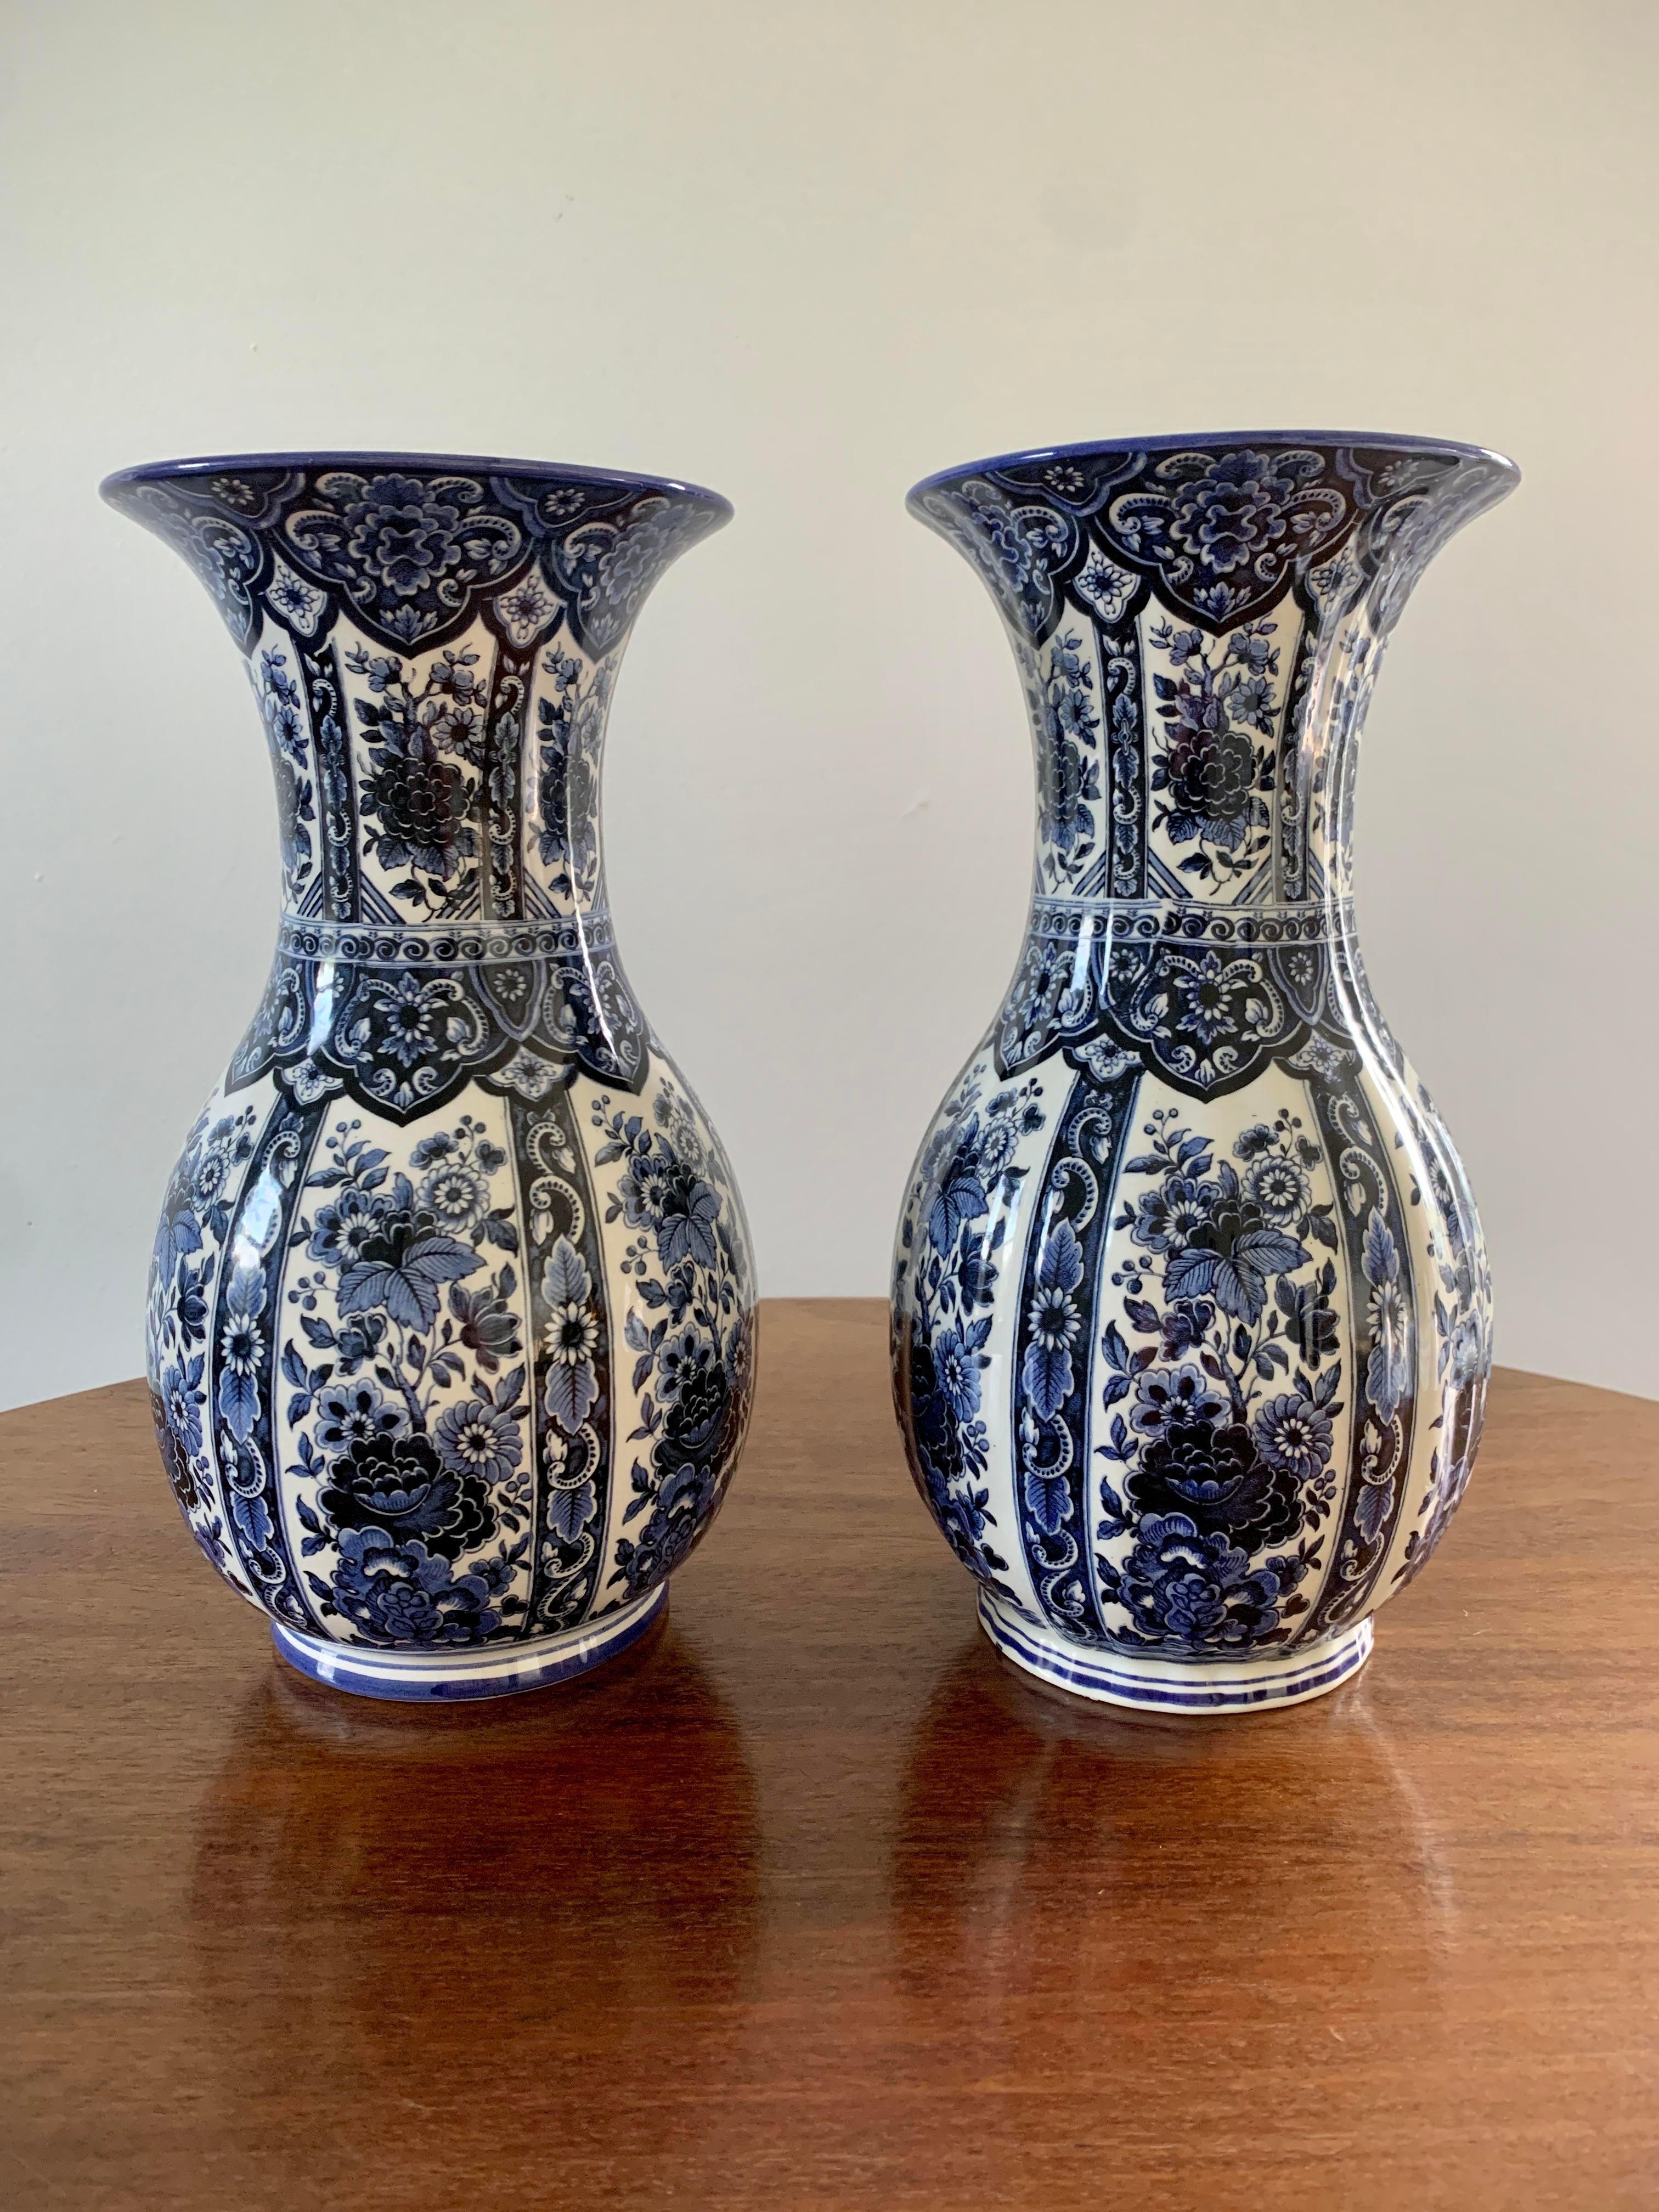 A pair of beautiful Italian blue and white porcelain vases

By Ardalt Blue Delfia

Italy, mid-20th century

Measures: 5.25